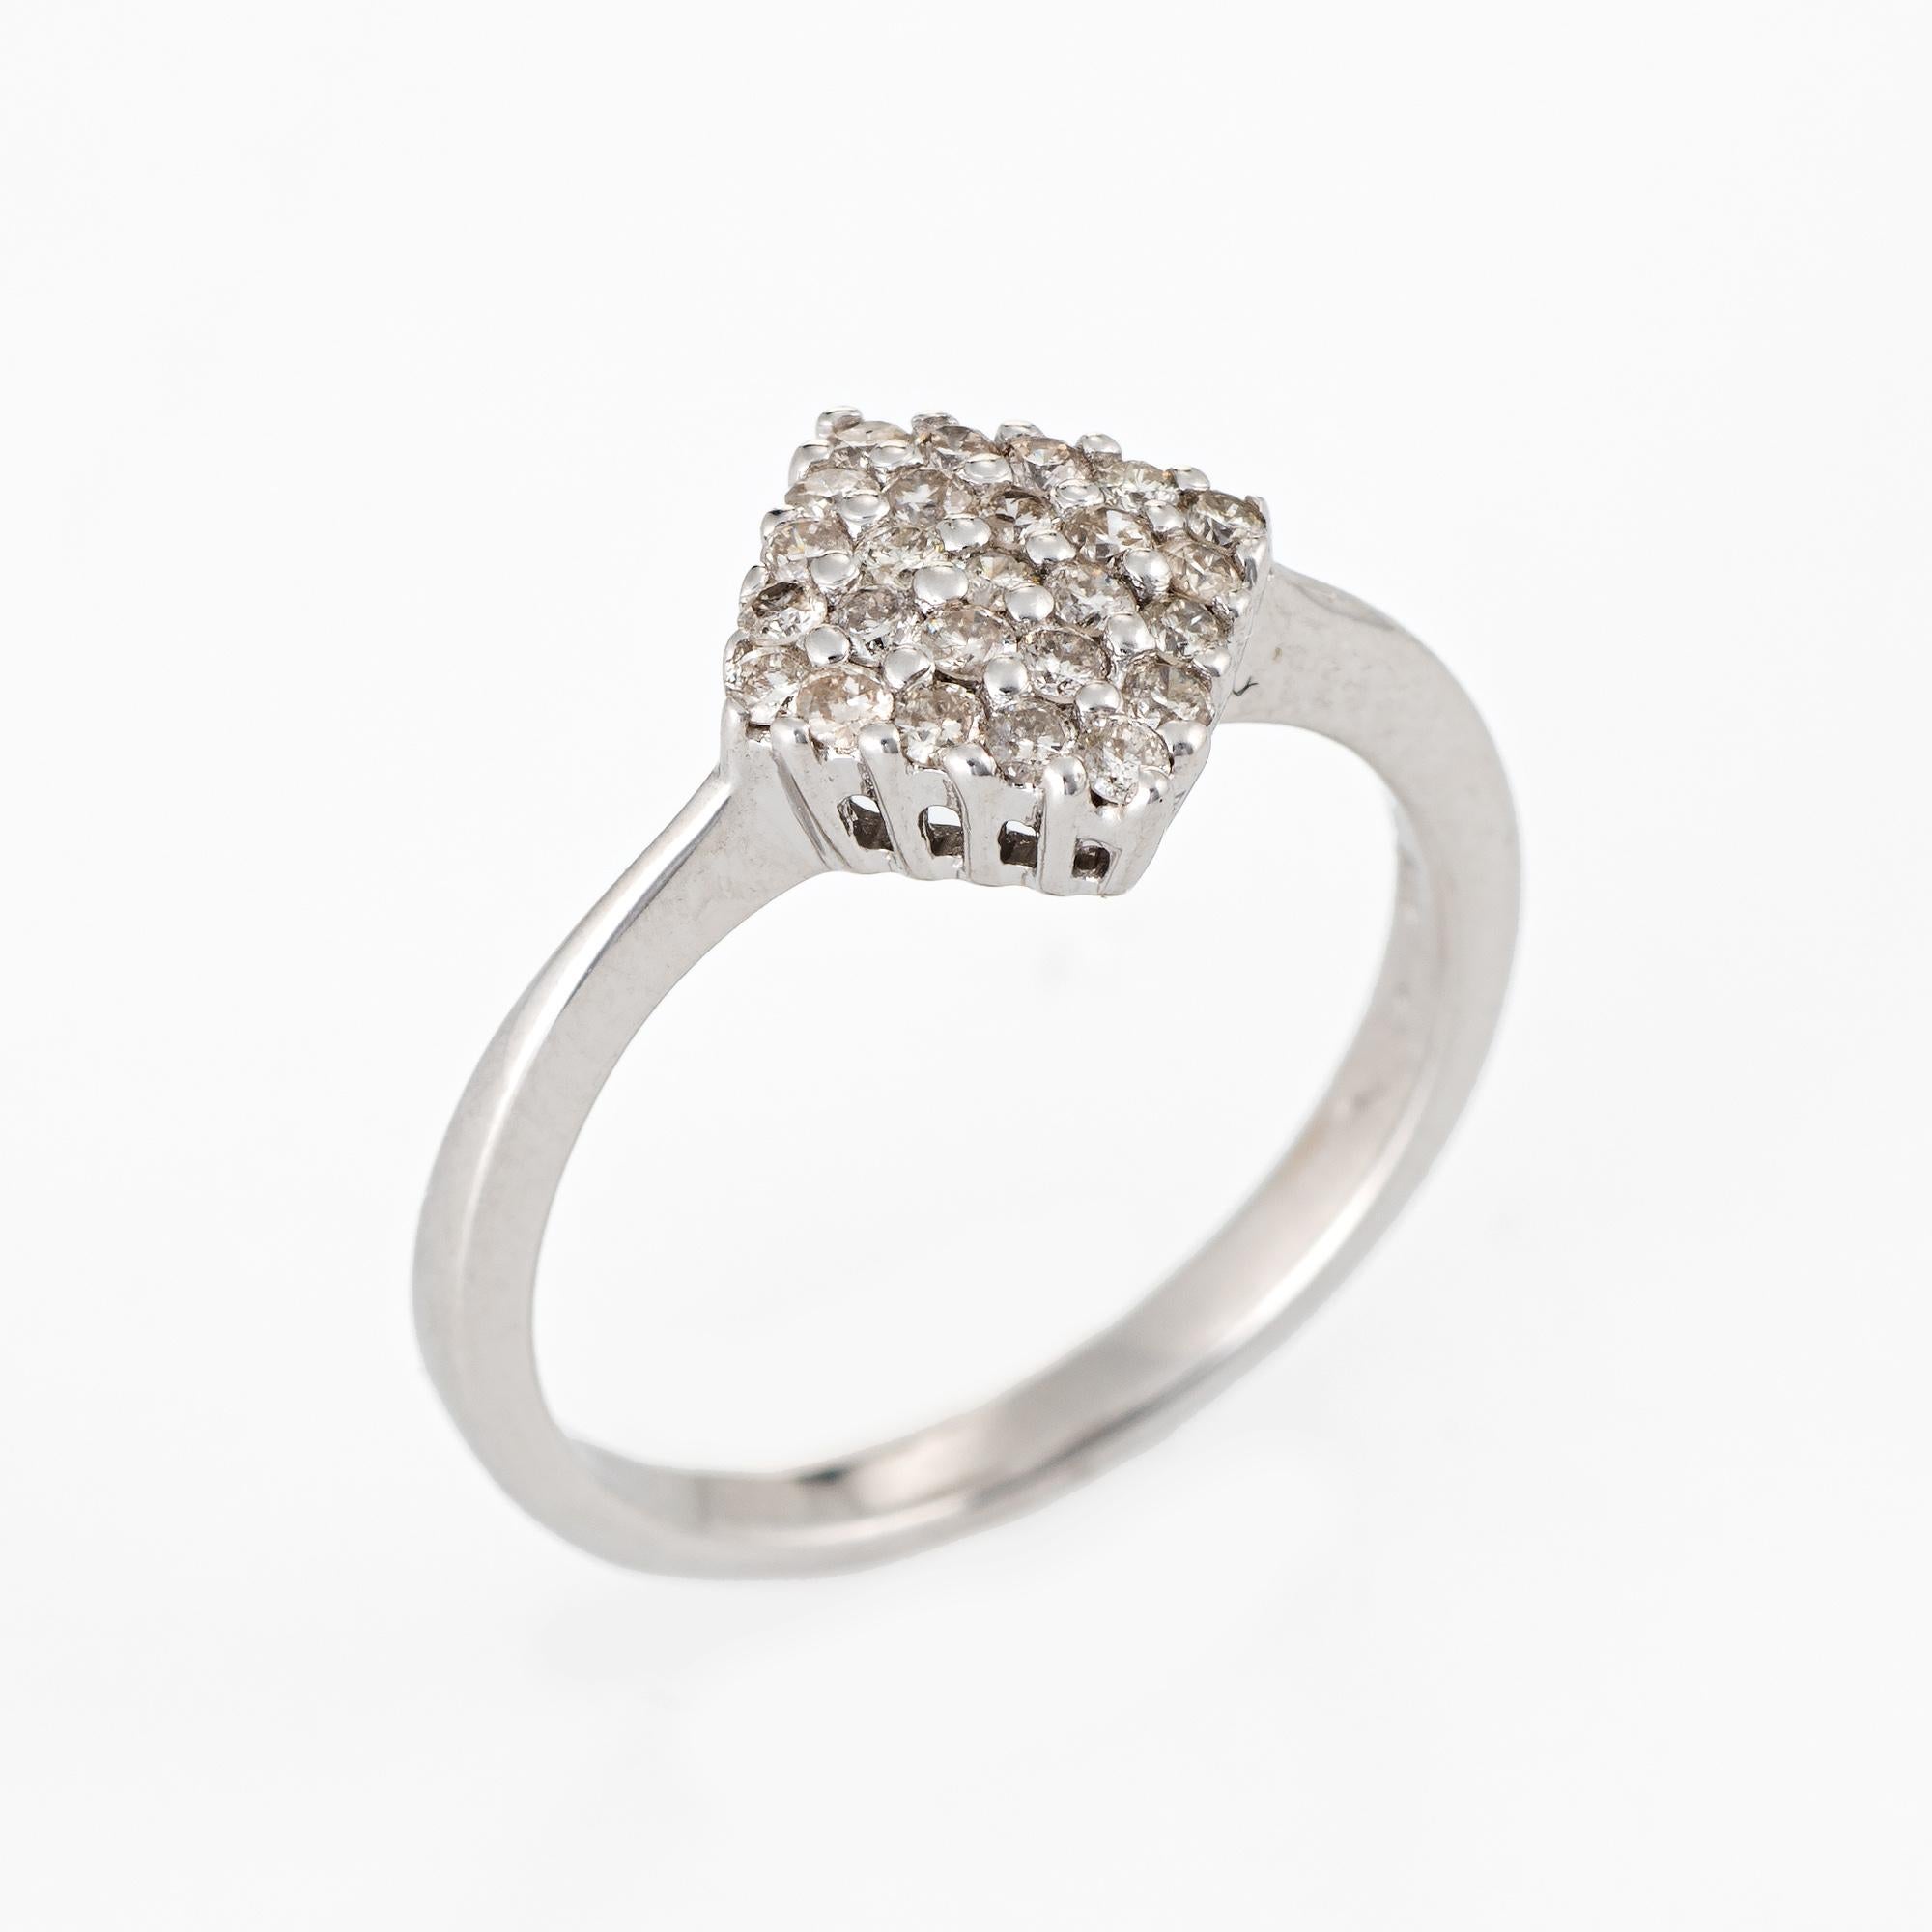 Stylish estate pave diamond ring crafted in 14 karat white gold. 

25 round brilliant cut diamonds total an estimated 0.25 carats (estimated at J color and I1 clarity). 

The diamond shaped mount is slightly concave in design that hugs the finger.